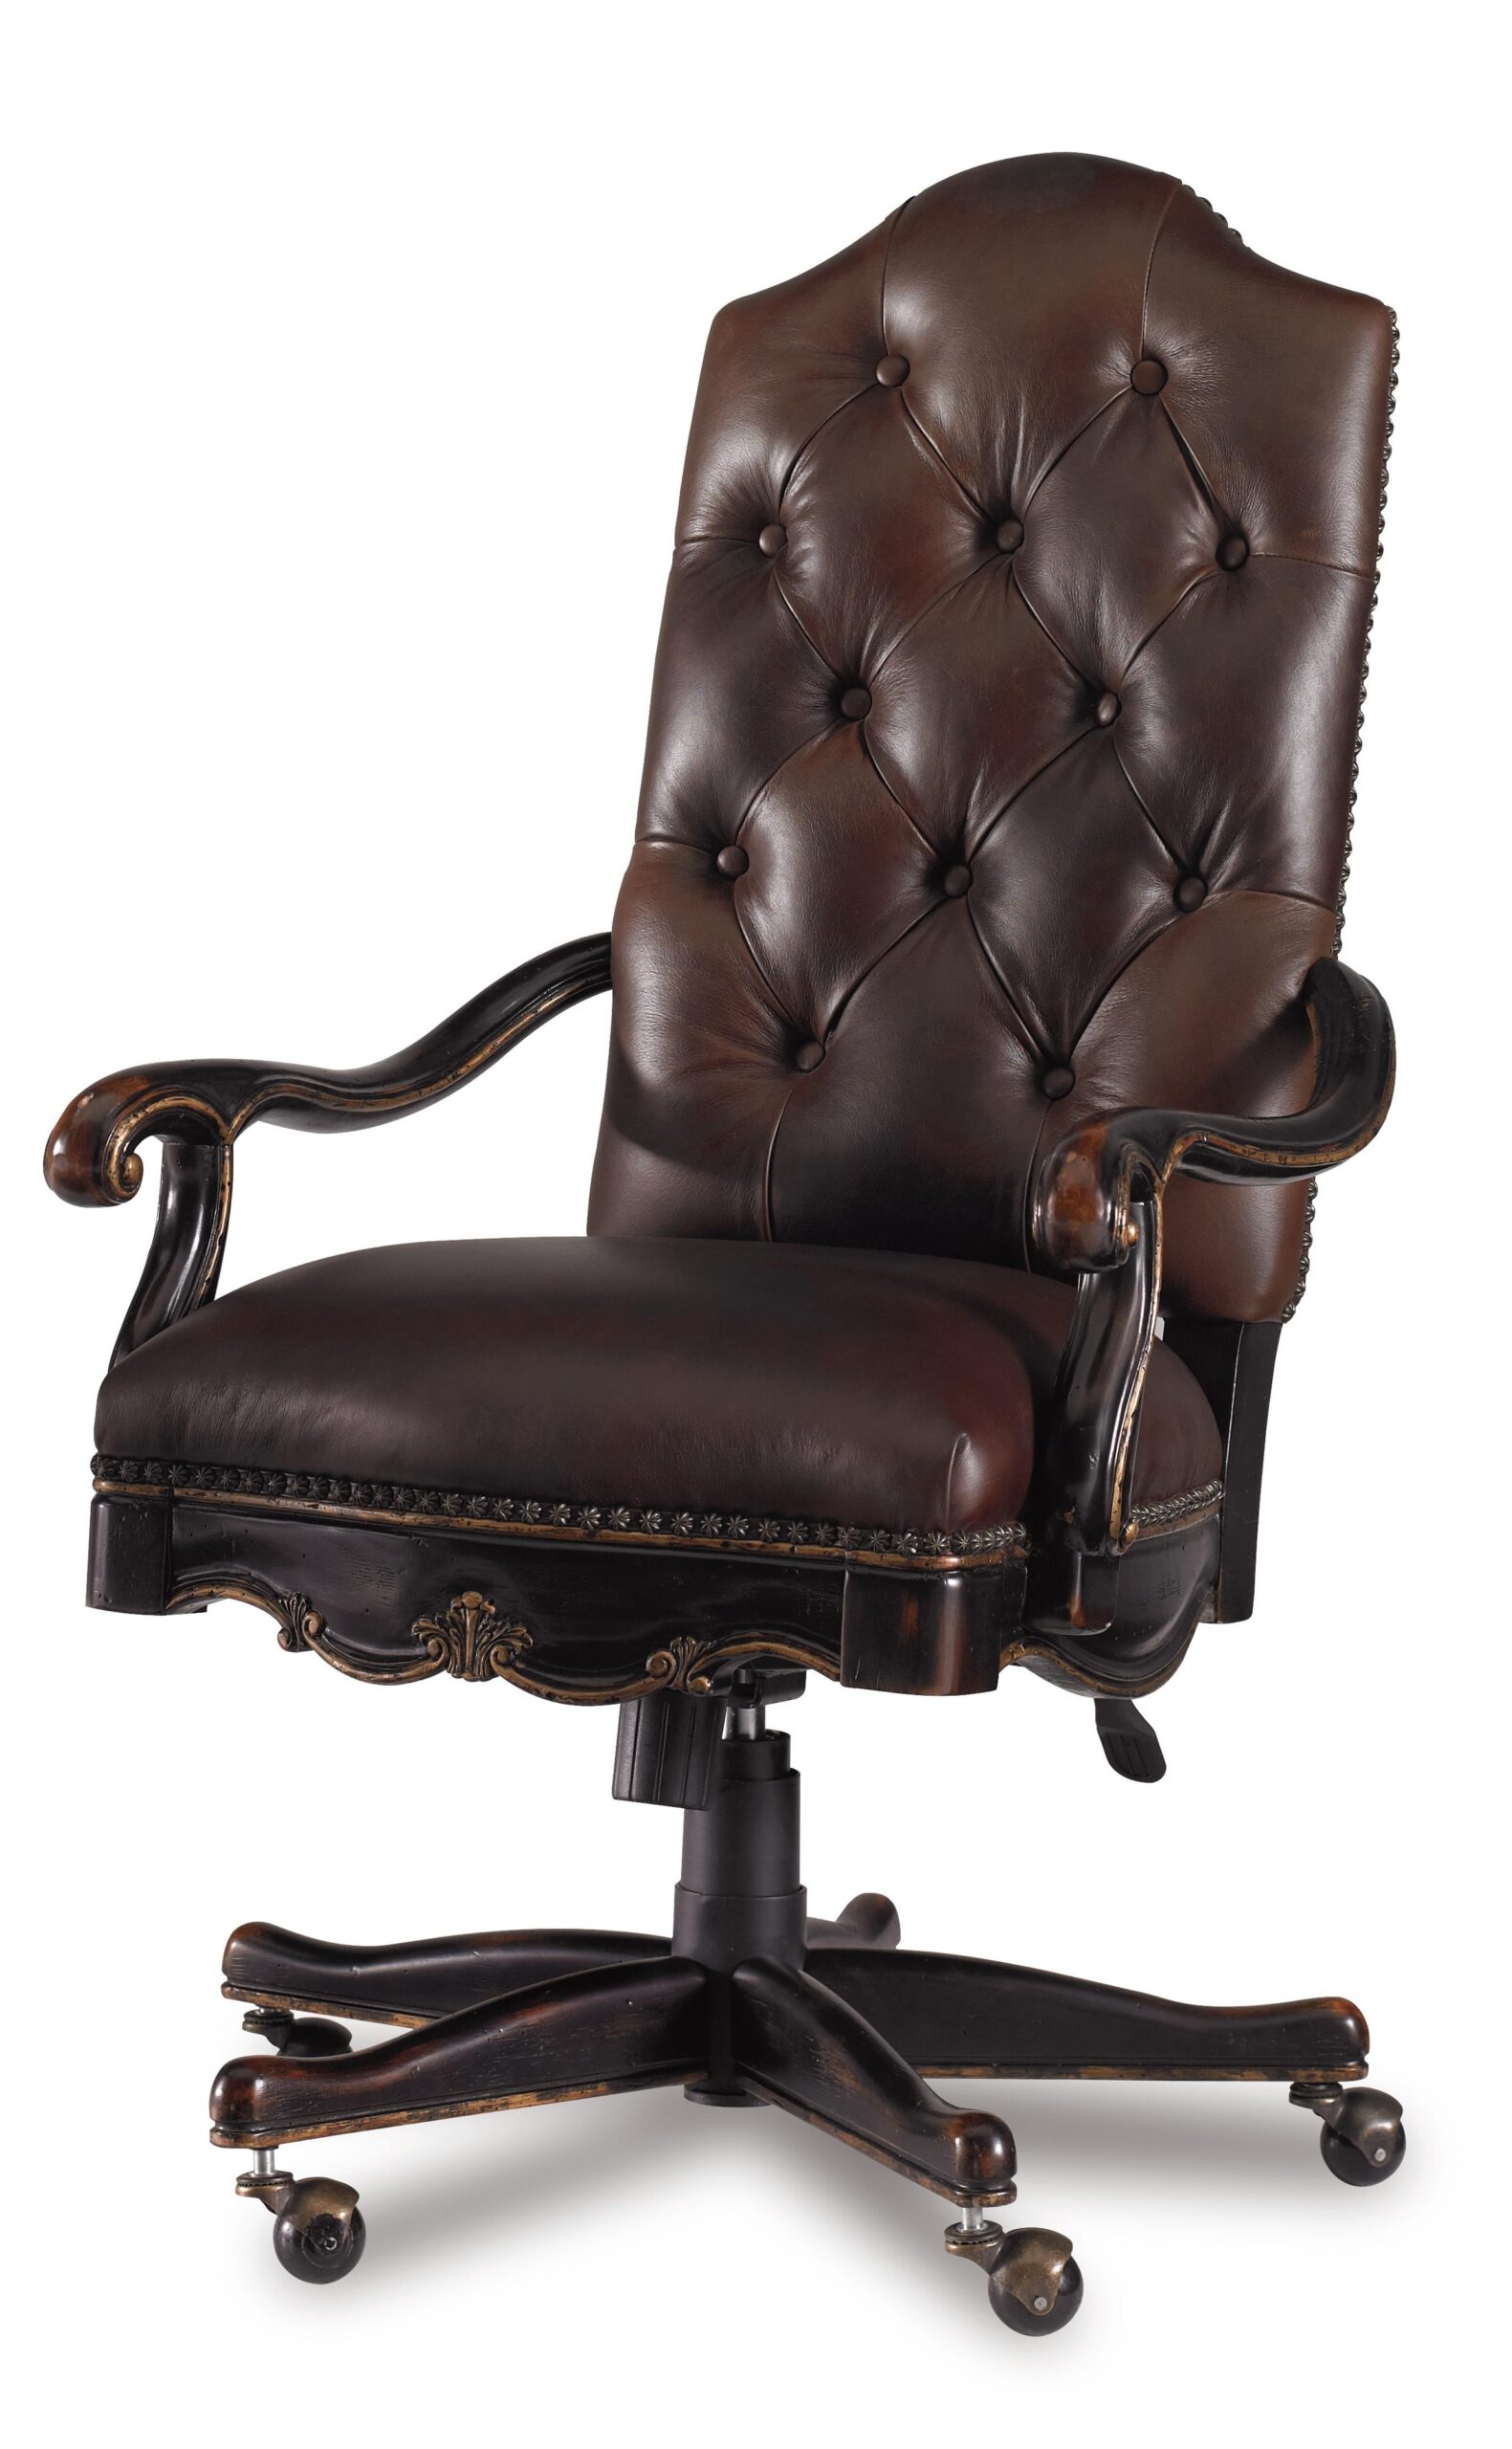 Large Executive Office Chairs